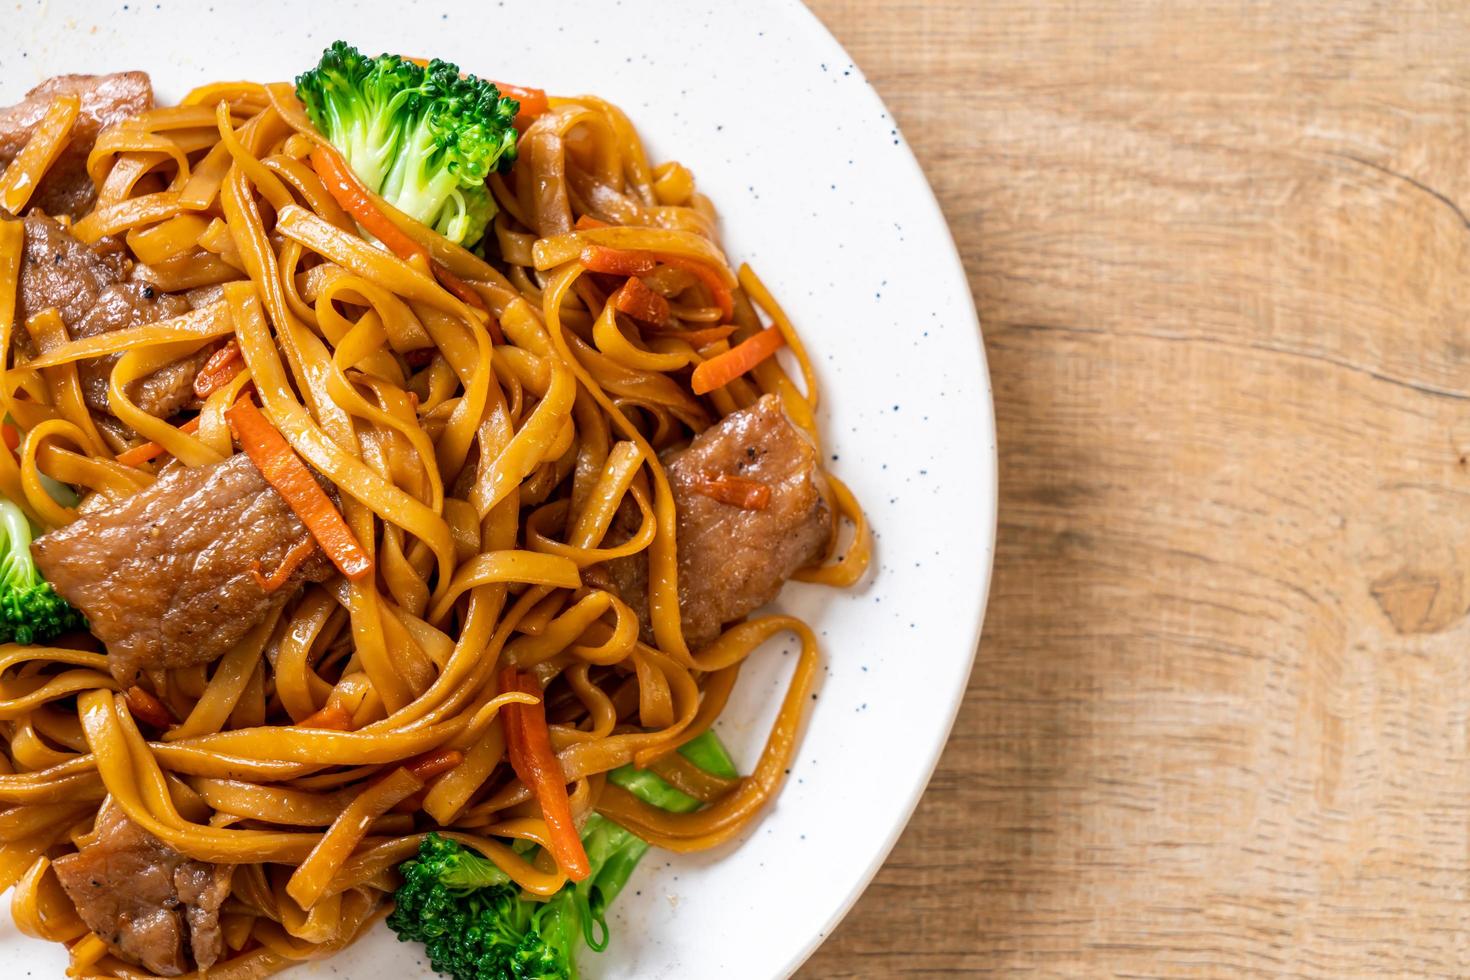 Stir-fried noodles with pork and vegetable - Asian food style photo